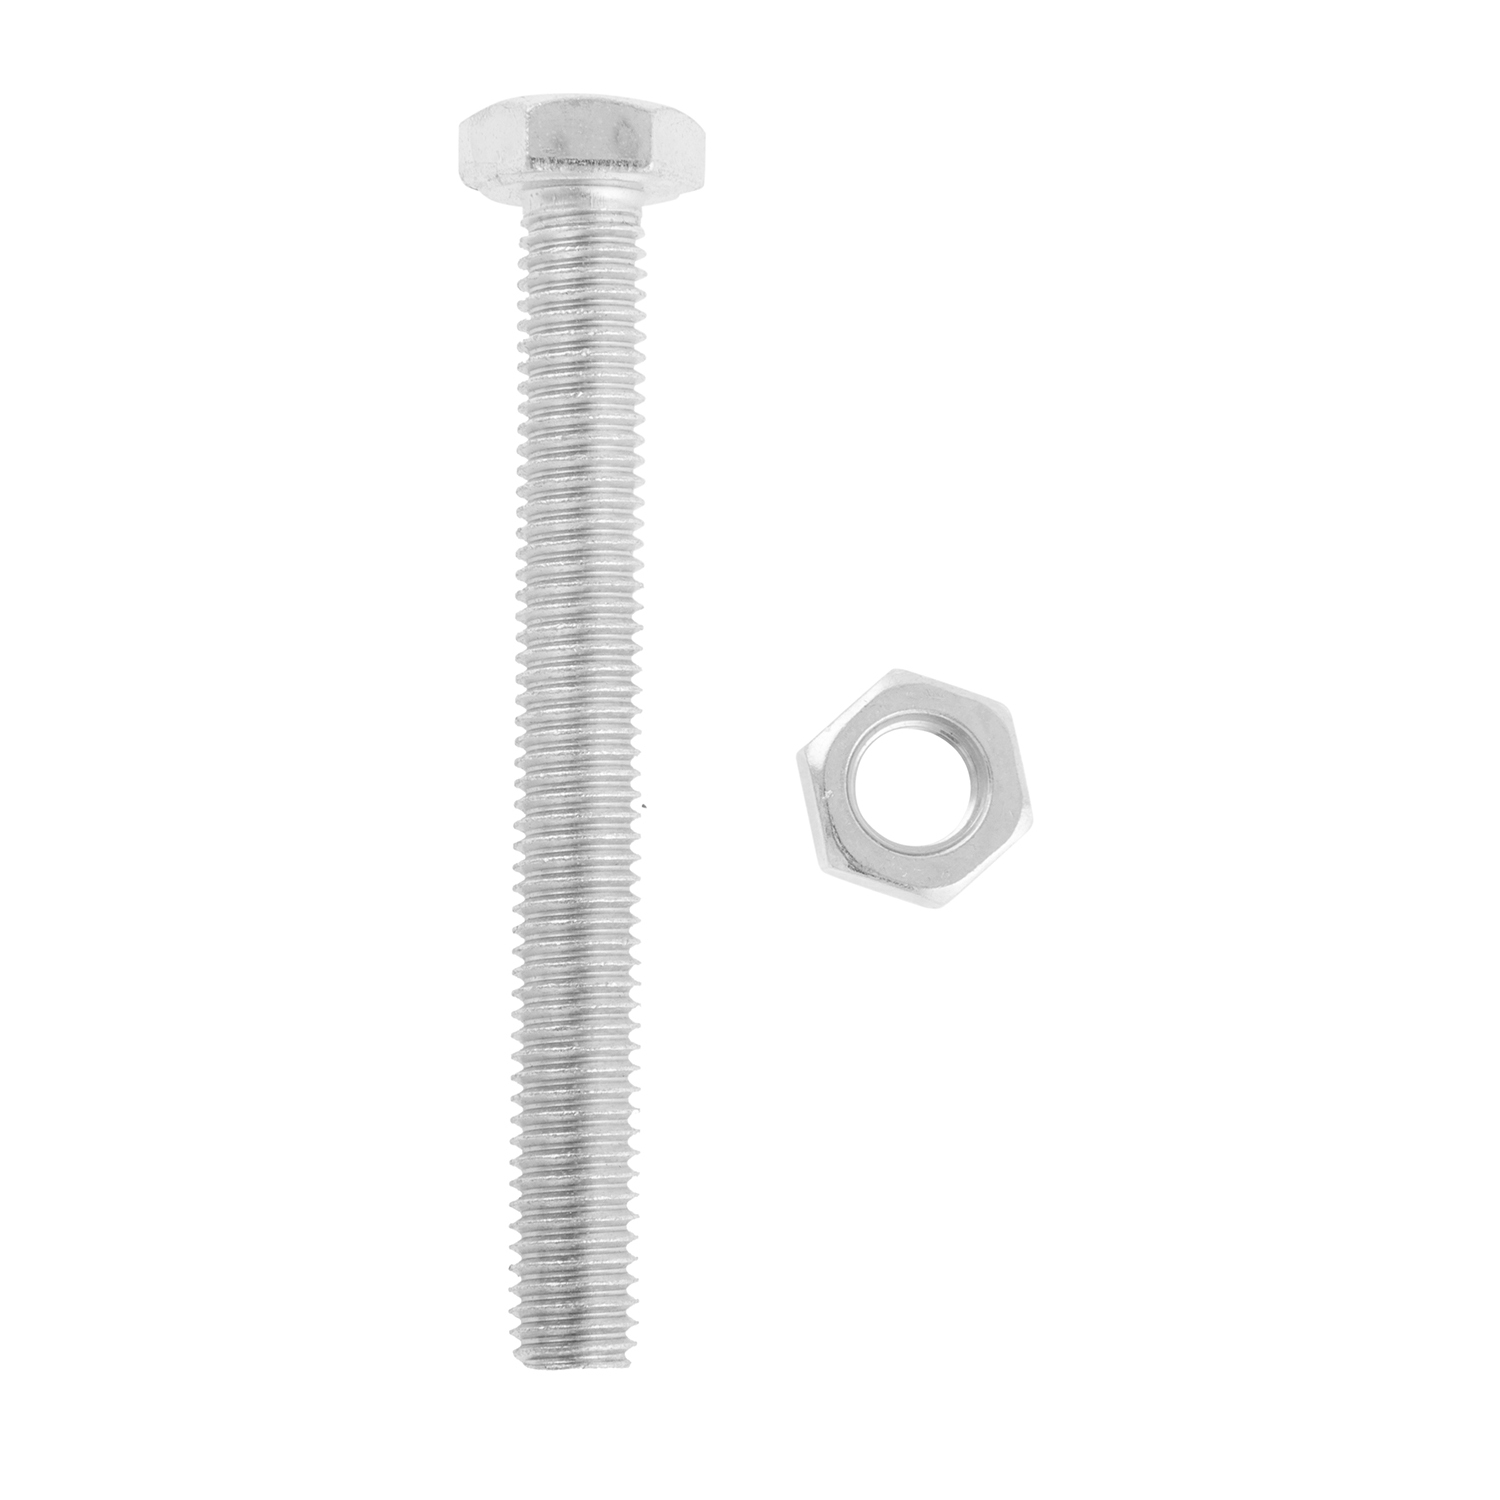 Hiatt M8 x 70mm Hex Bolt Nut and Washer 6 Pack Image 2